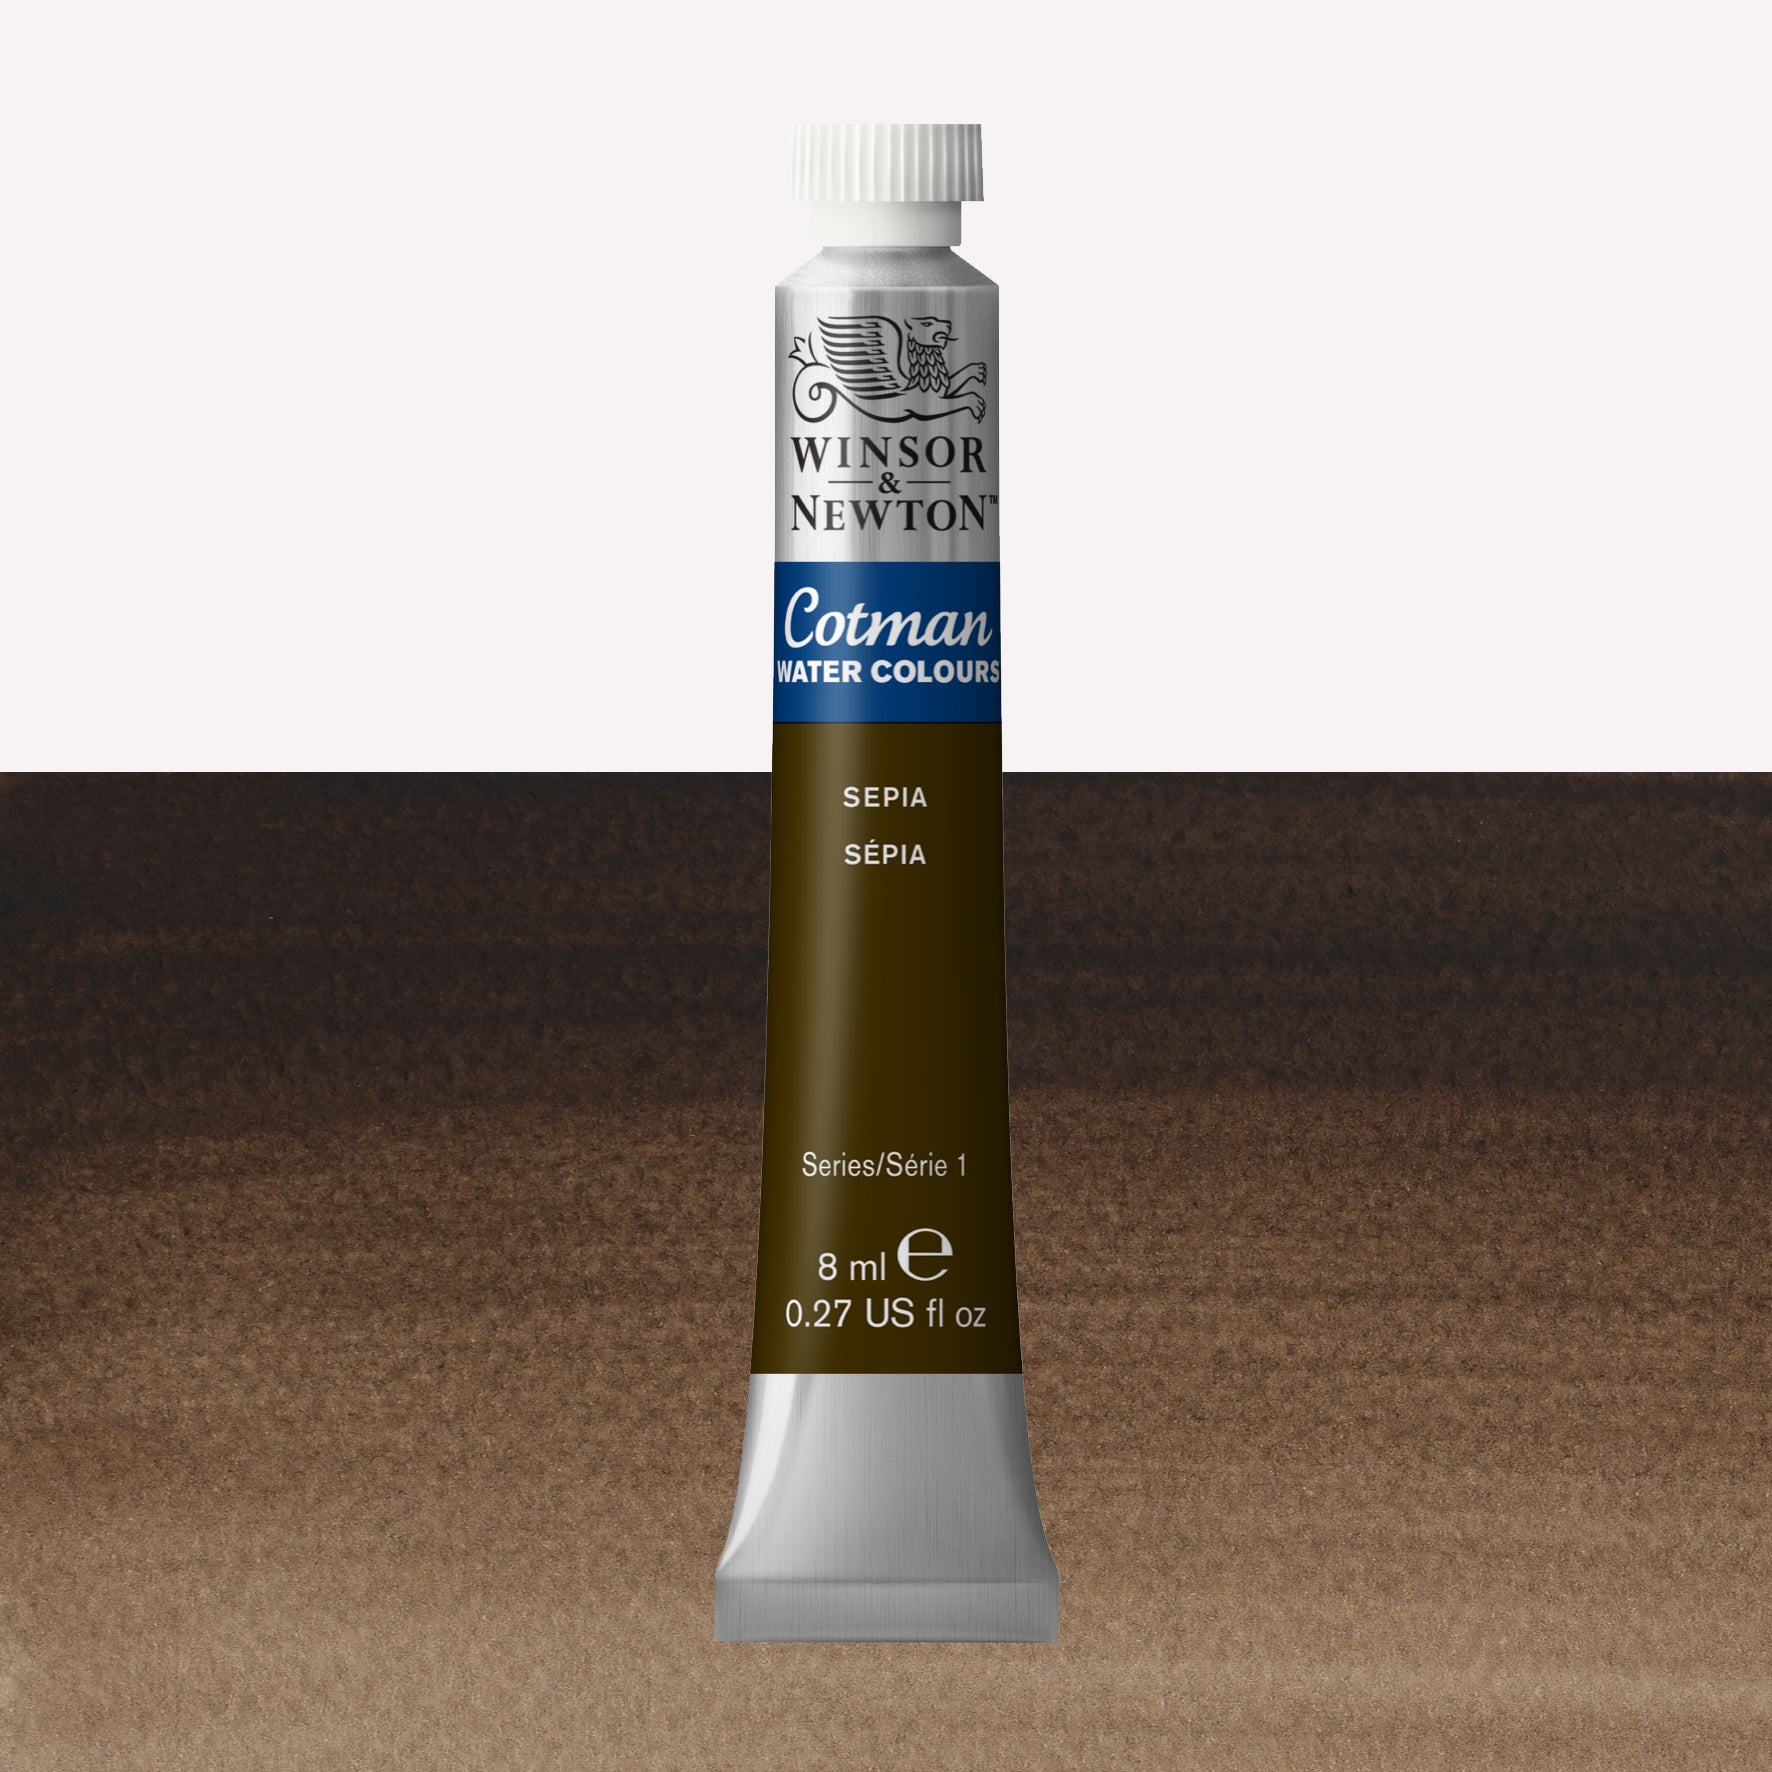 Winsor & Newton Cotman watercolour paint packaged in 8ml silver tube with a white lid in the shade Sepia over a highly pigmented colour swatch.